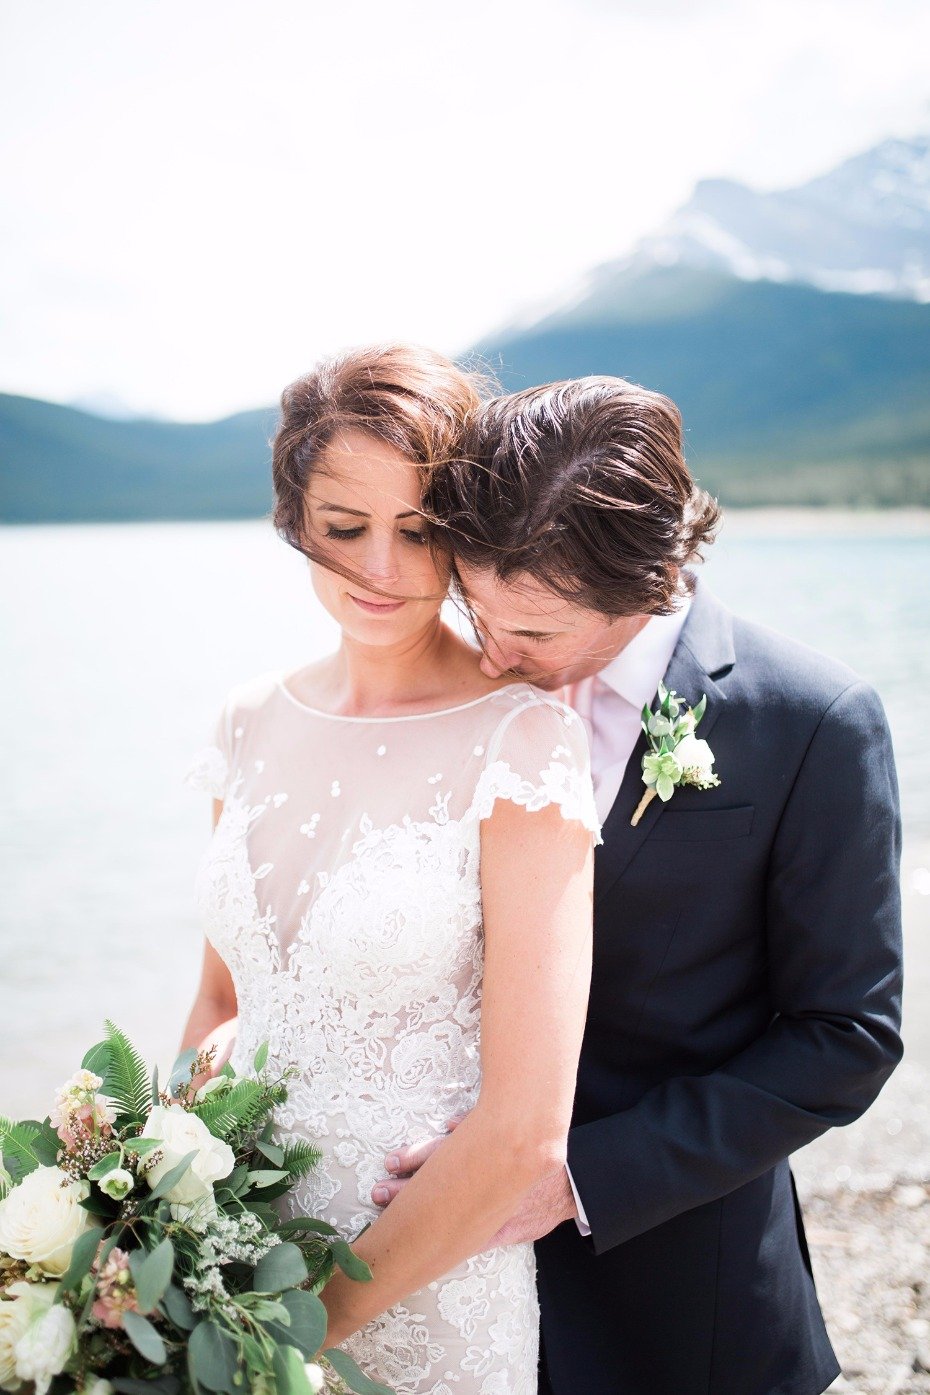 It's a rainy day for a Canadian Rockies wedding